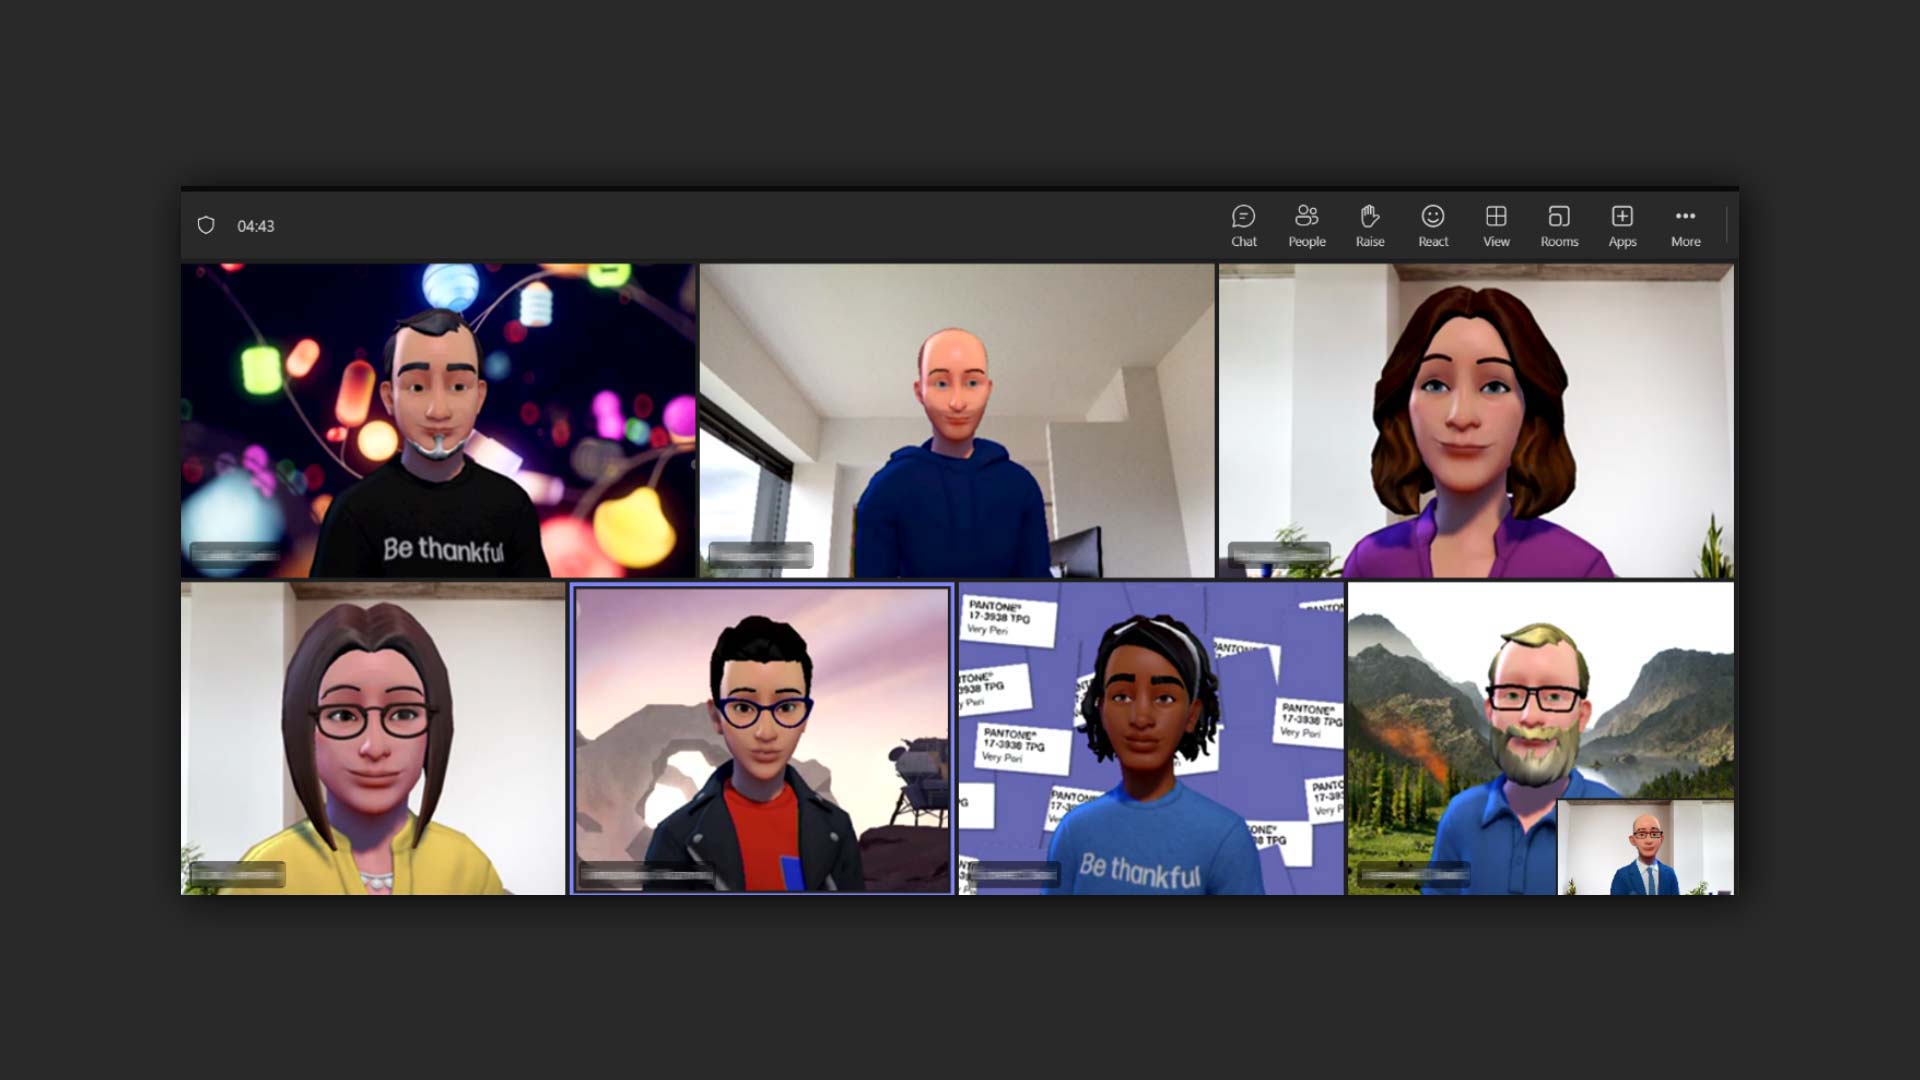 How Mesh Avatars Improve Your Presence in Teams Meetings